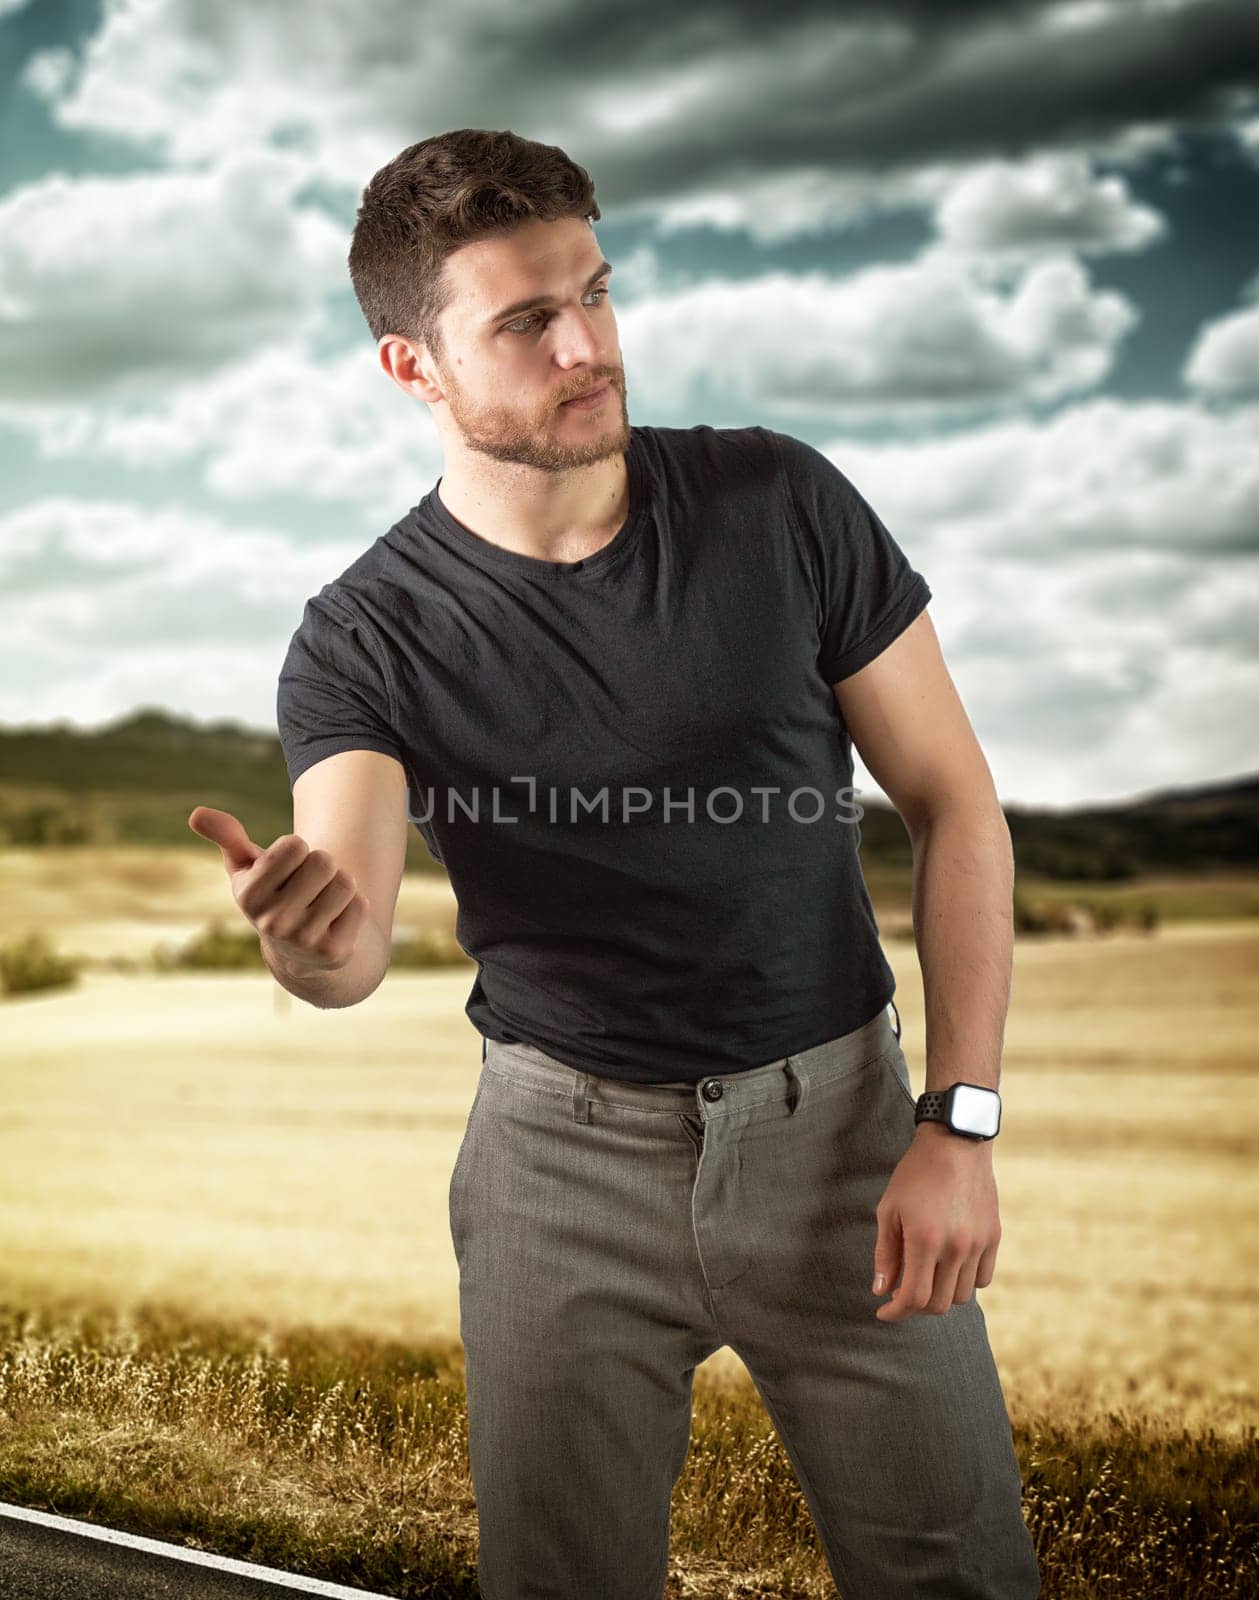 Handsome young man, a hitchhiker waiting for car on roadside in city, wearing black t-shirt